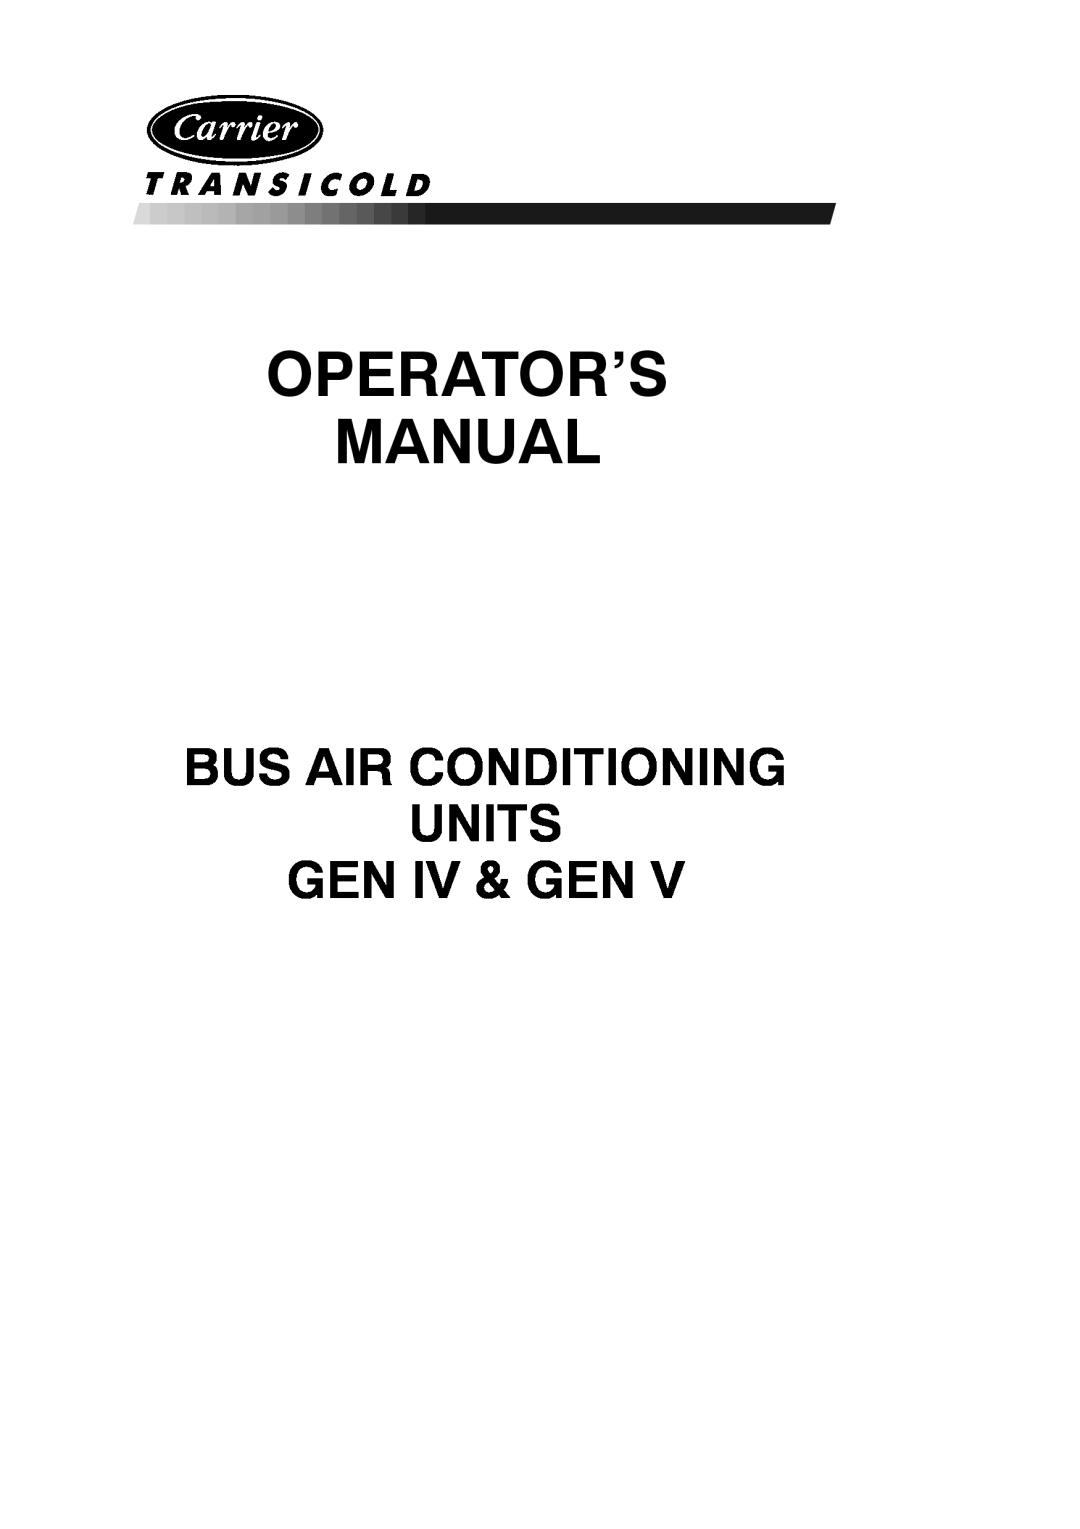 Carrier T-326 manual Operator’S Manual, Bus Air Conditioning Units Gen Iv & Gen 